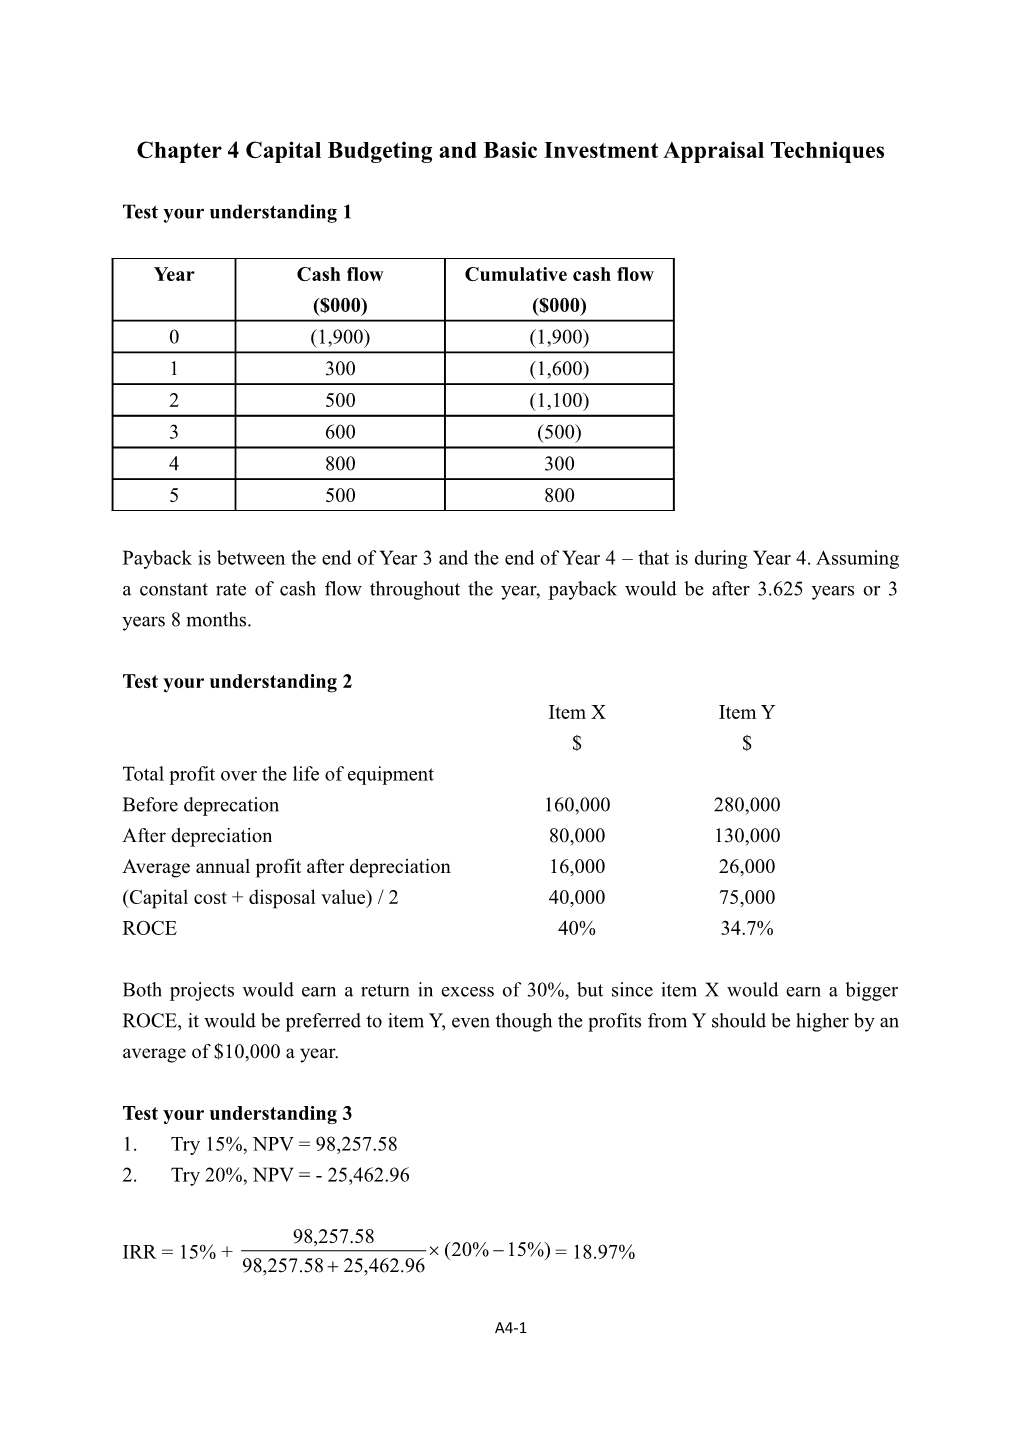 Chapter 4 Capital Budgeting And Basic Investment Appraisal Techniques